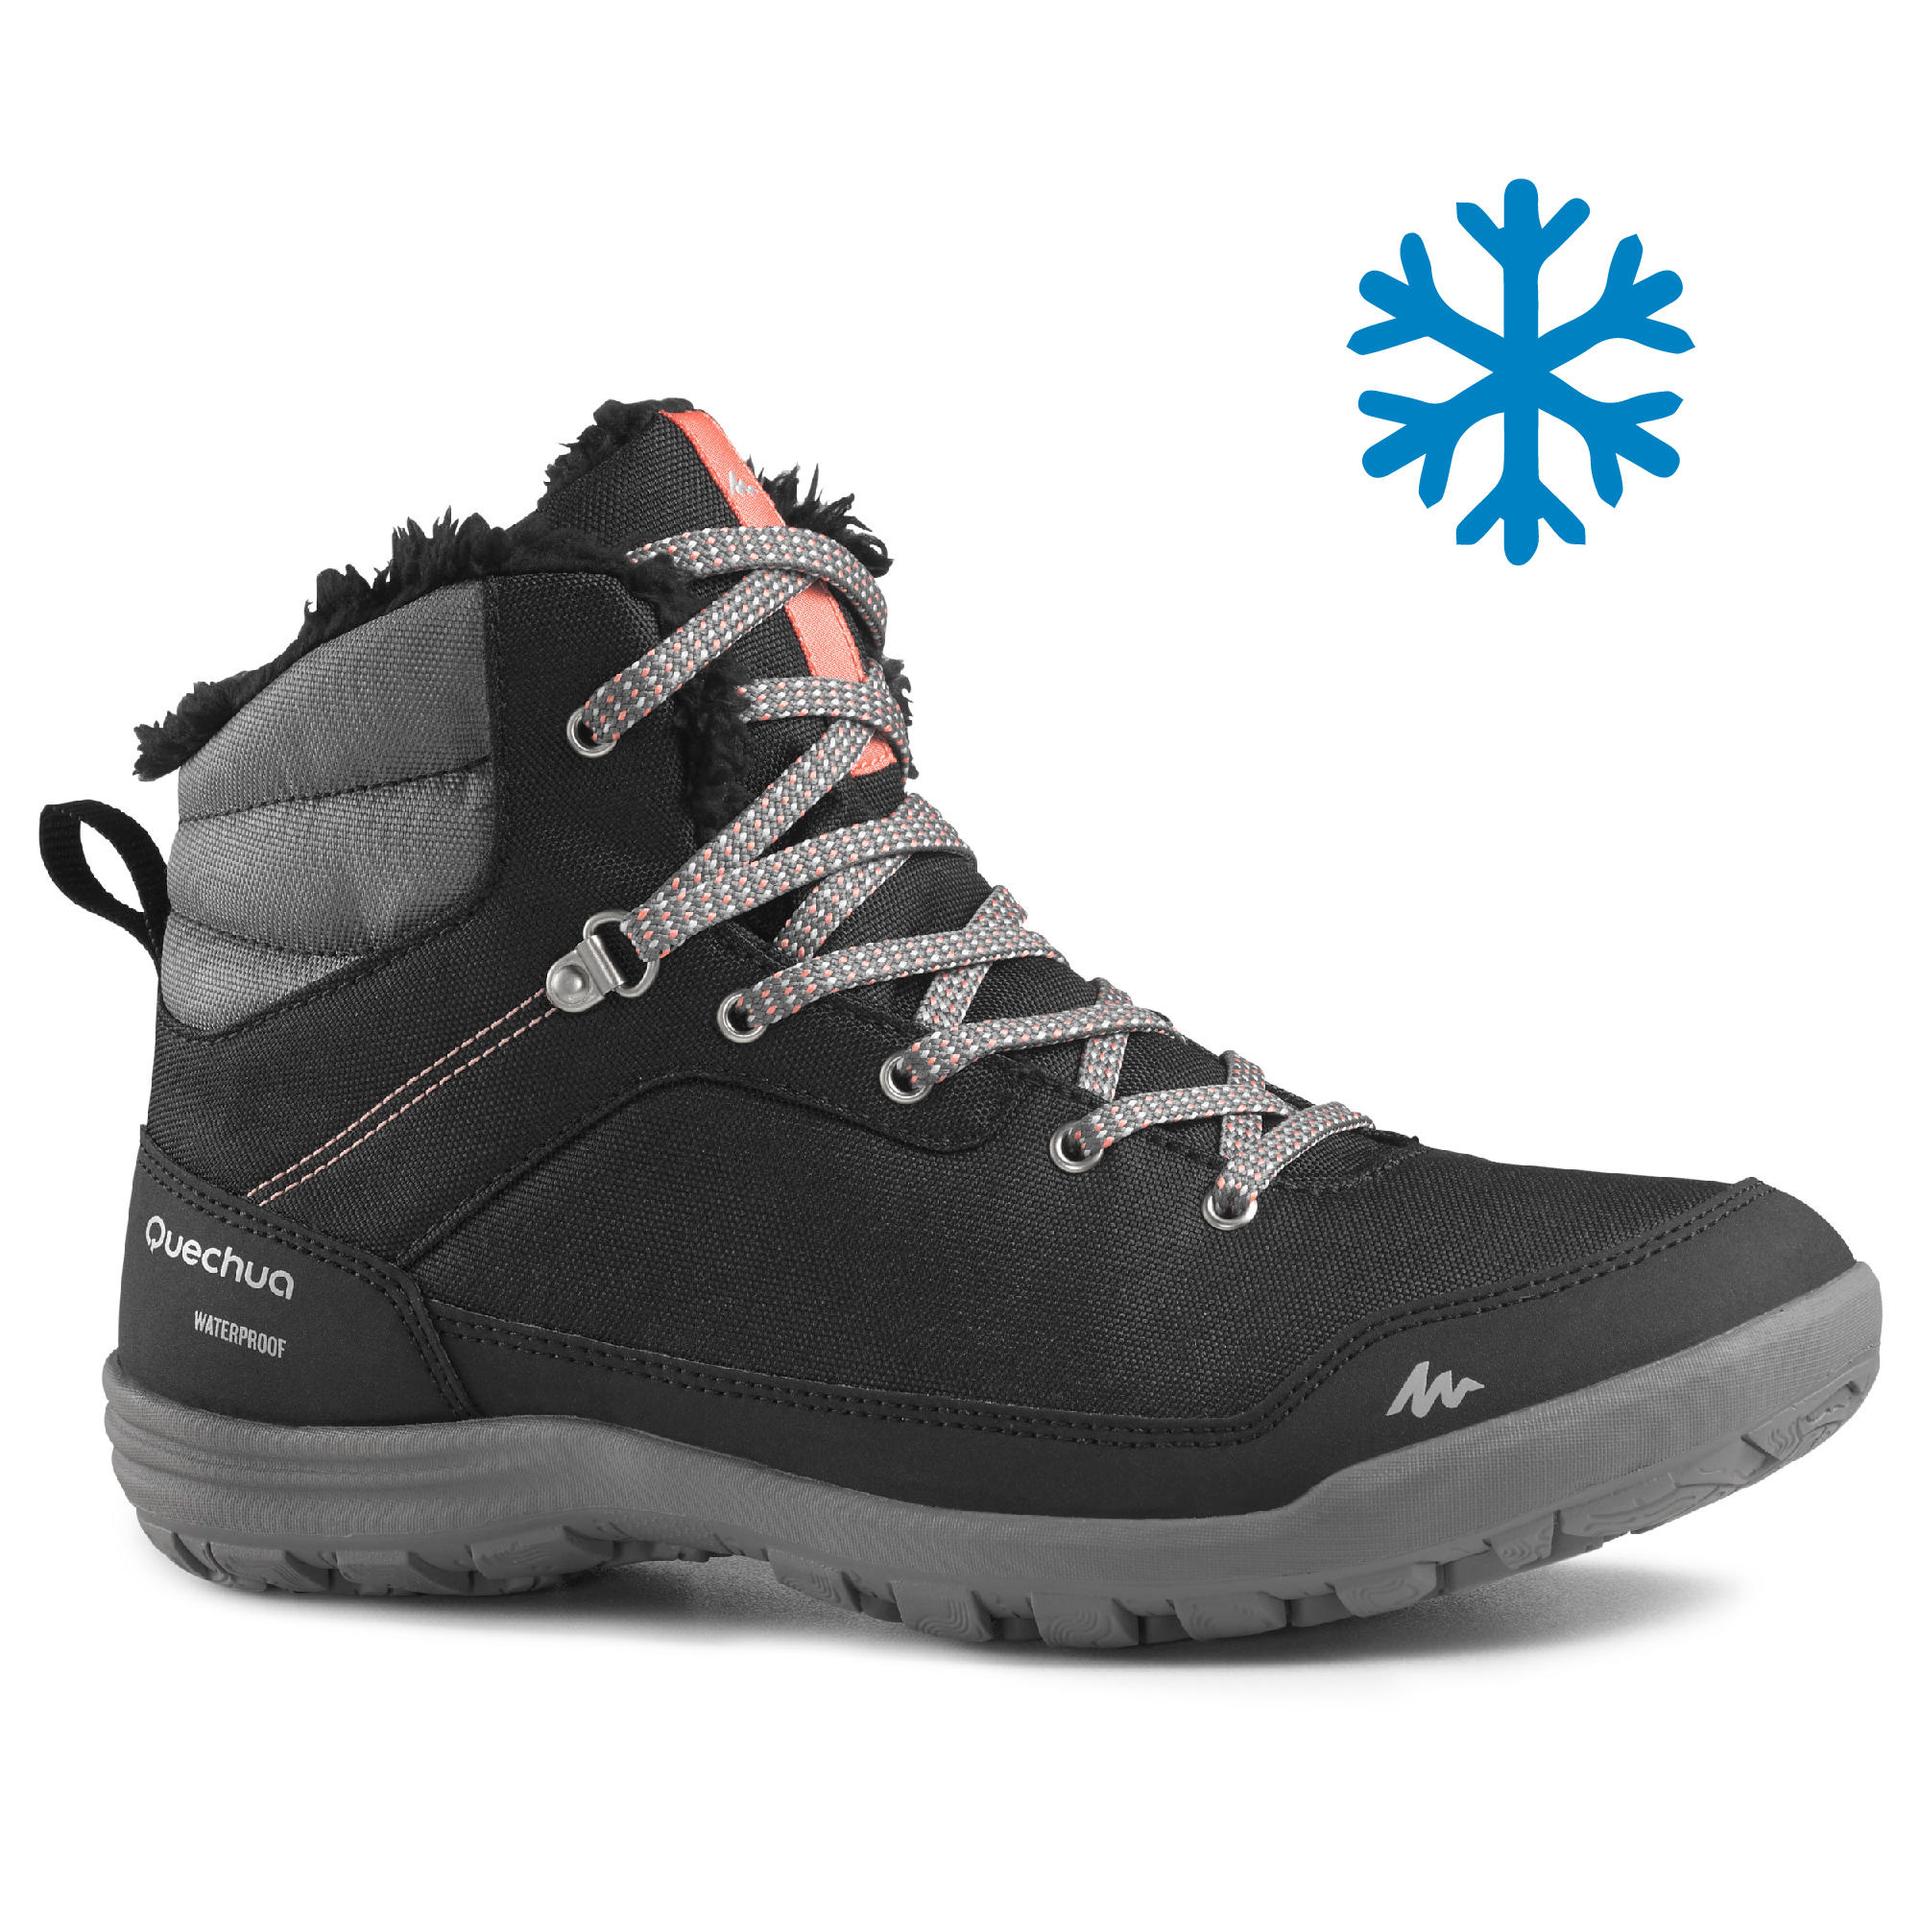 women hiking warm and waterproof boots sh100 mid